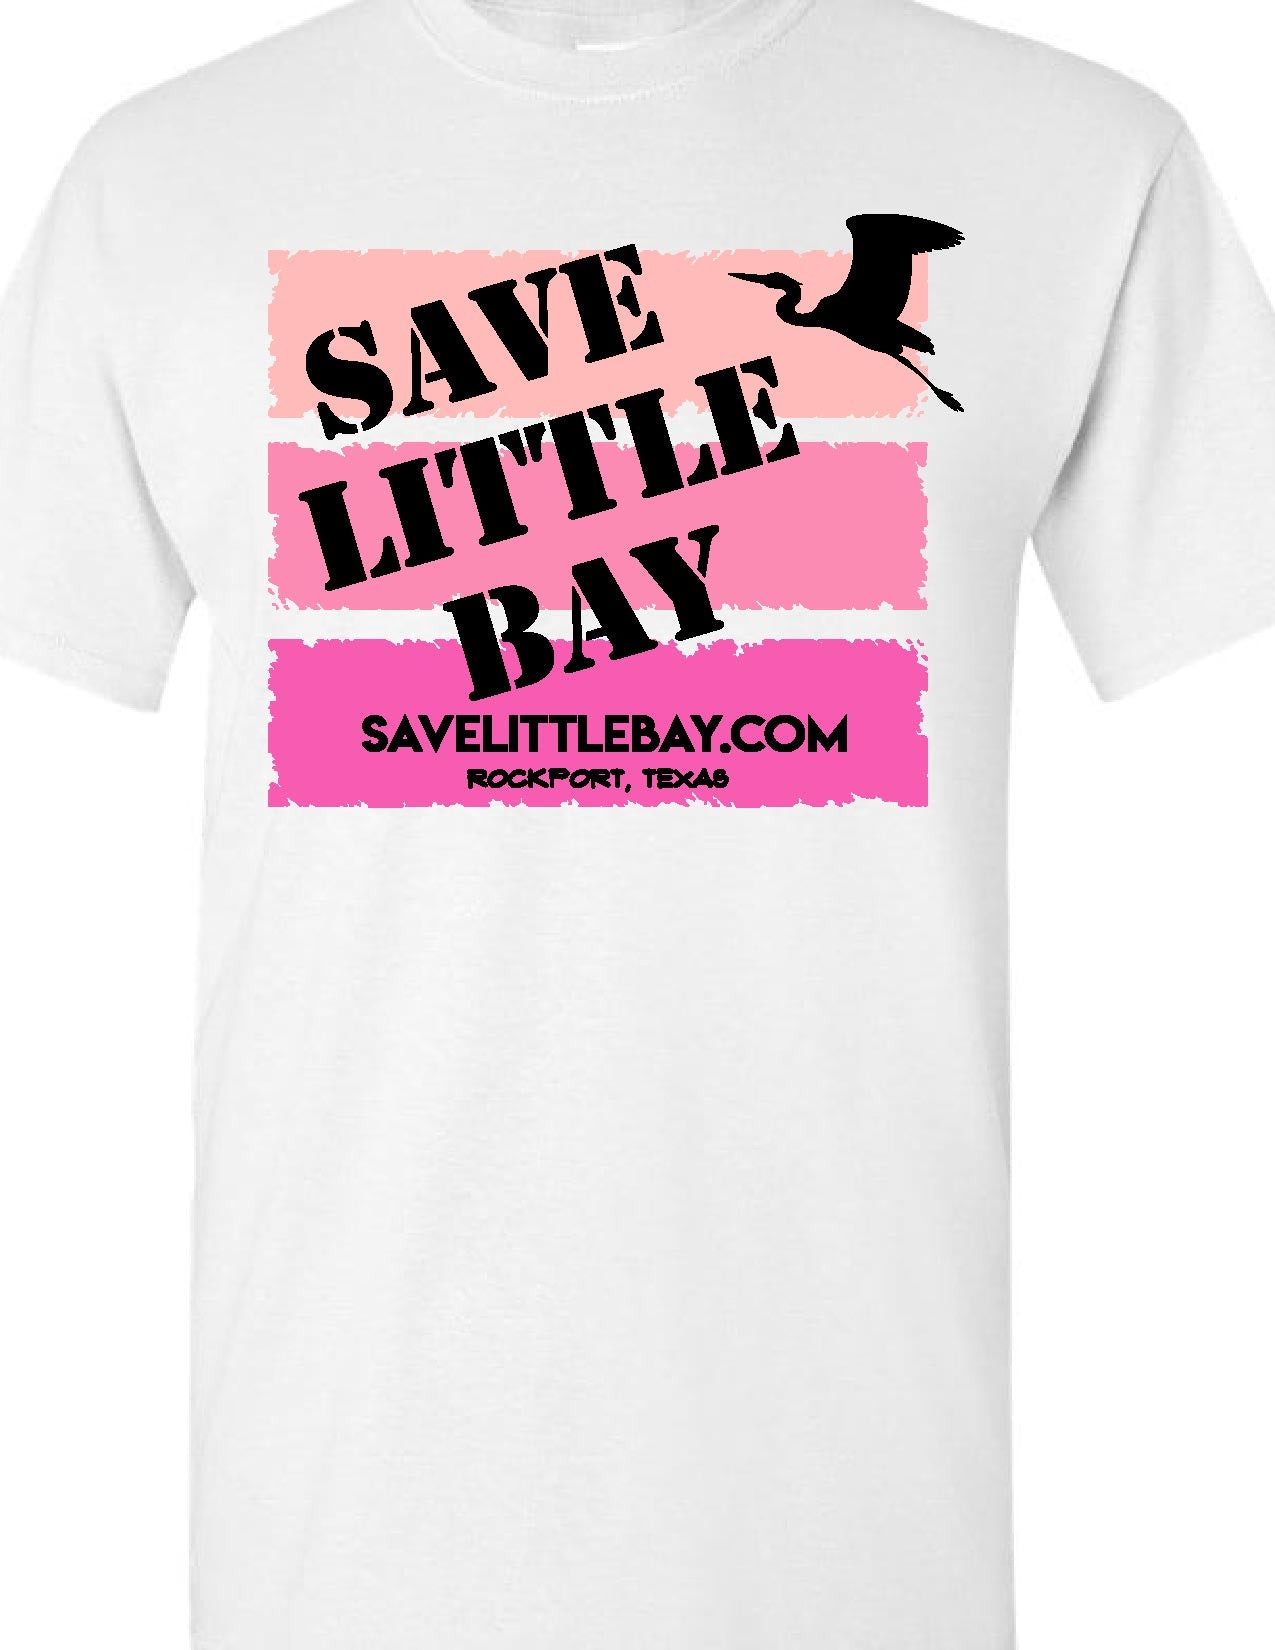 SAVE LITTLE BAY - T-SHIRT - WHITE & PINK